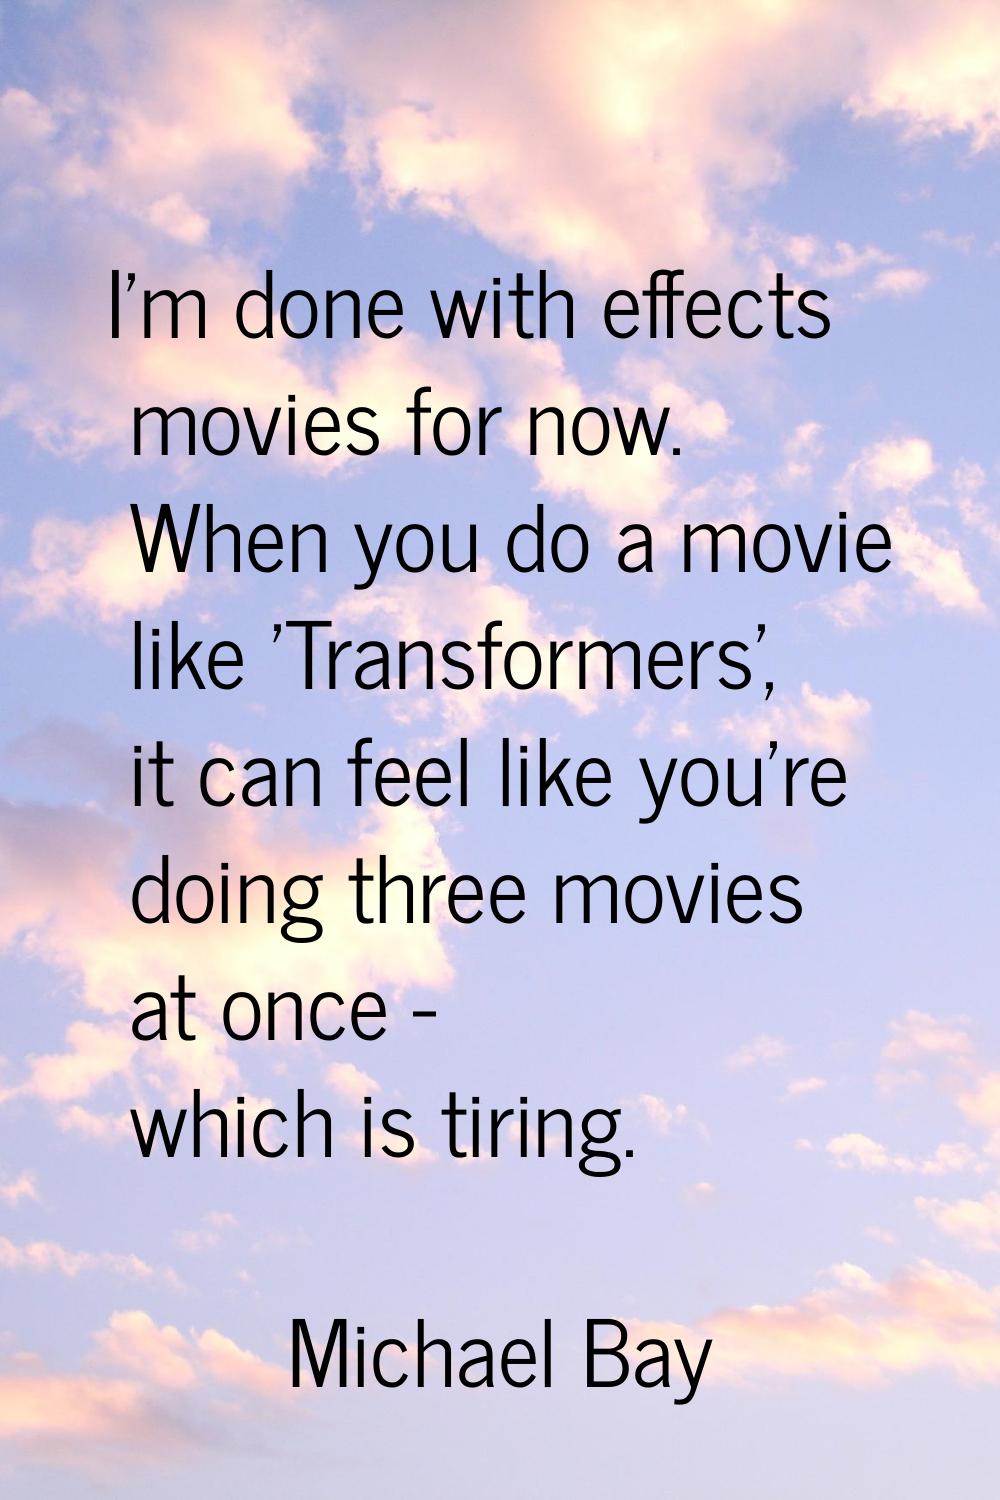 I'm done with effects movies for now. When you do a movie like 'Transformers', it can feel like you